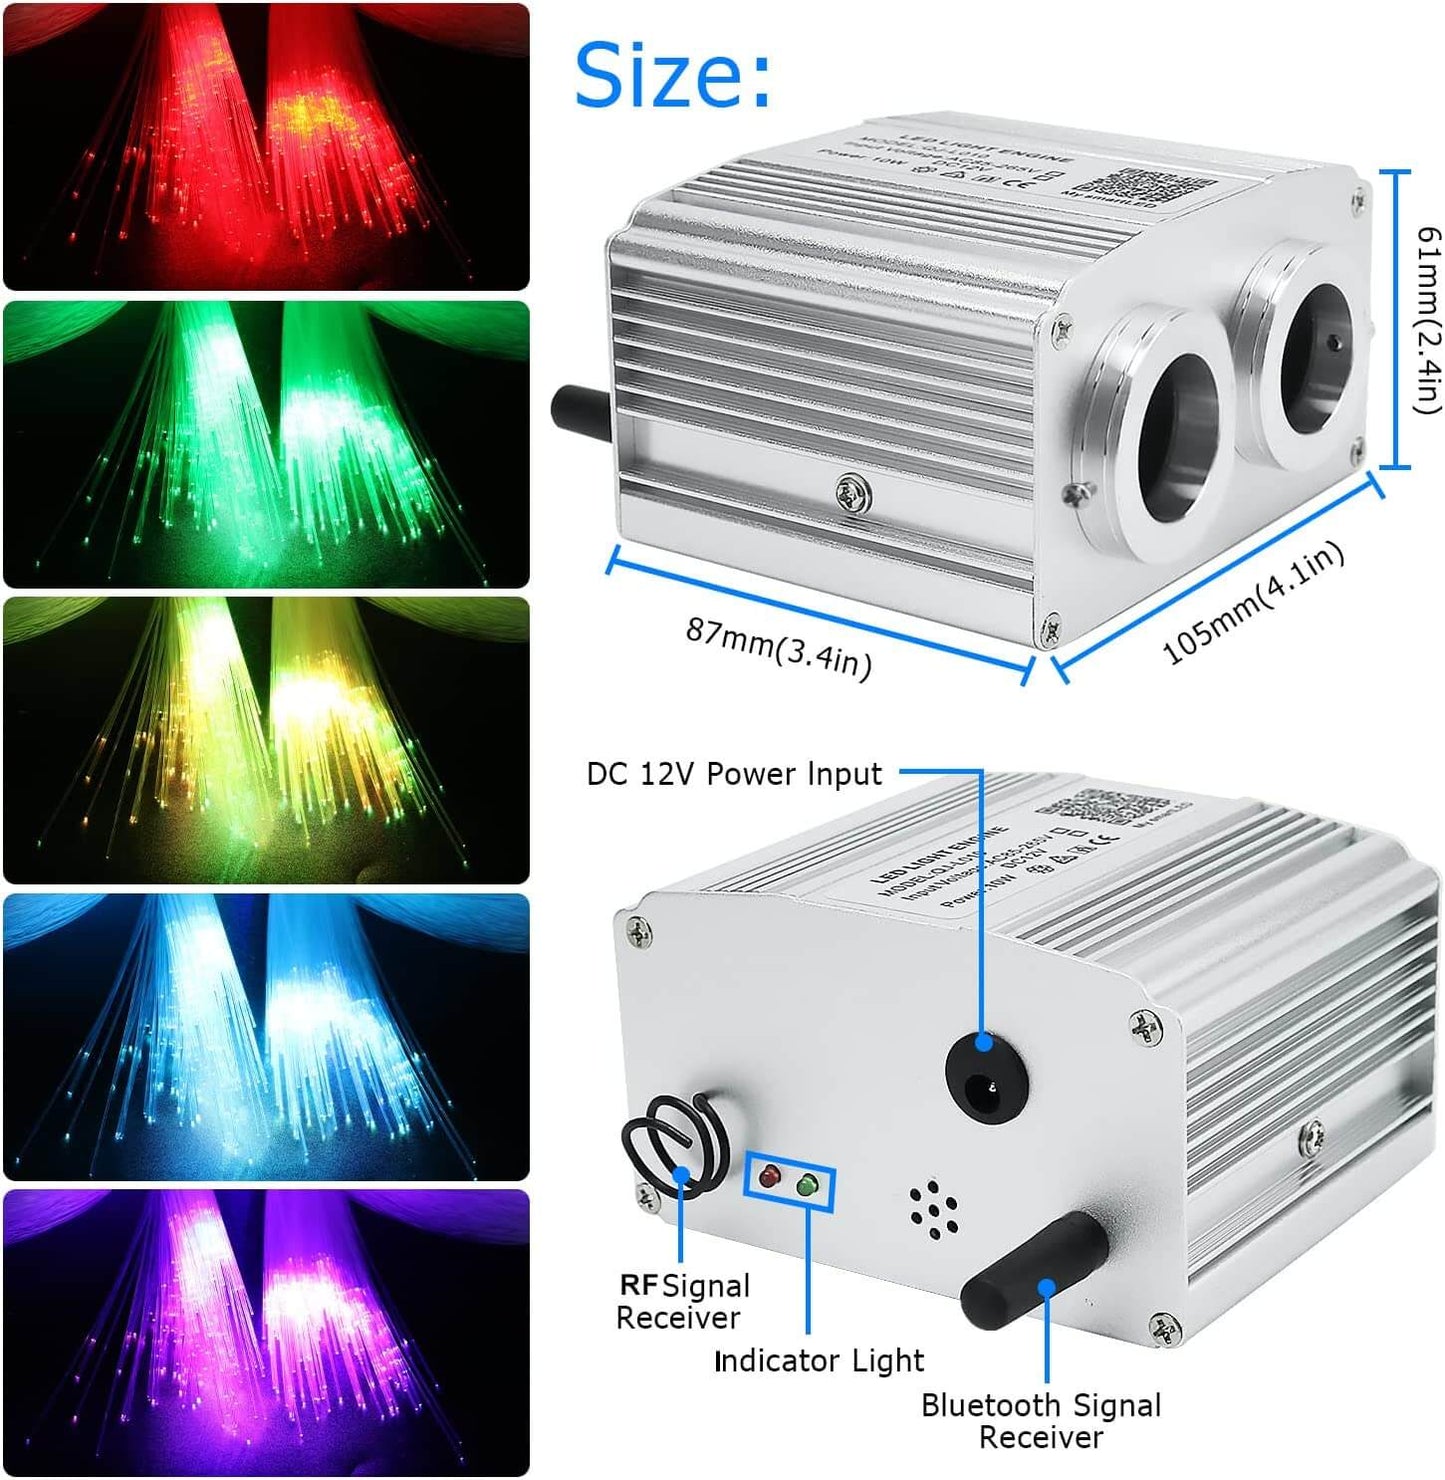 2x8W Twinkle RGBW Rolls Royce Ceiling Stars with Fiber Optic for Car Truck & Home Rooms